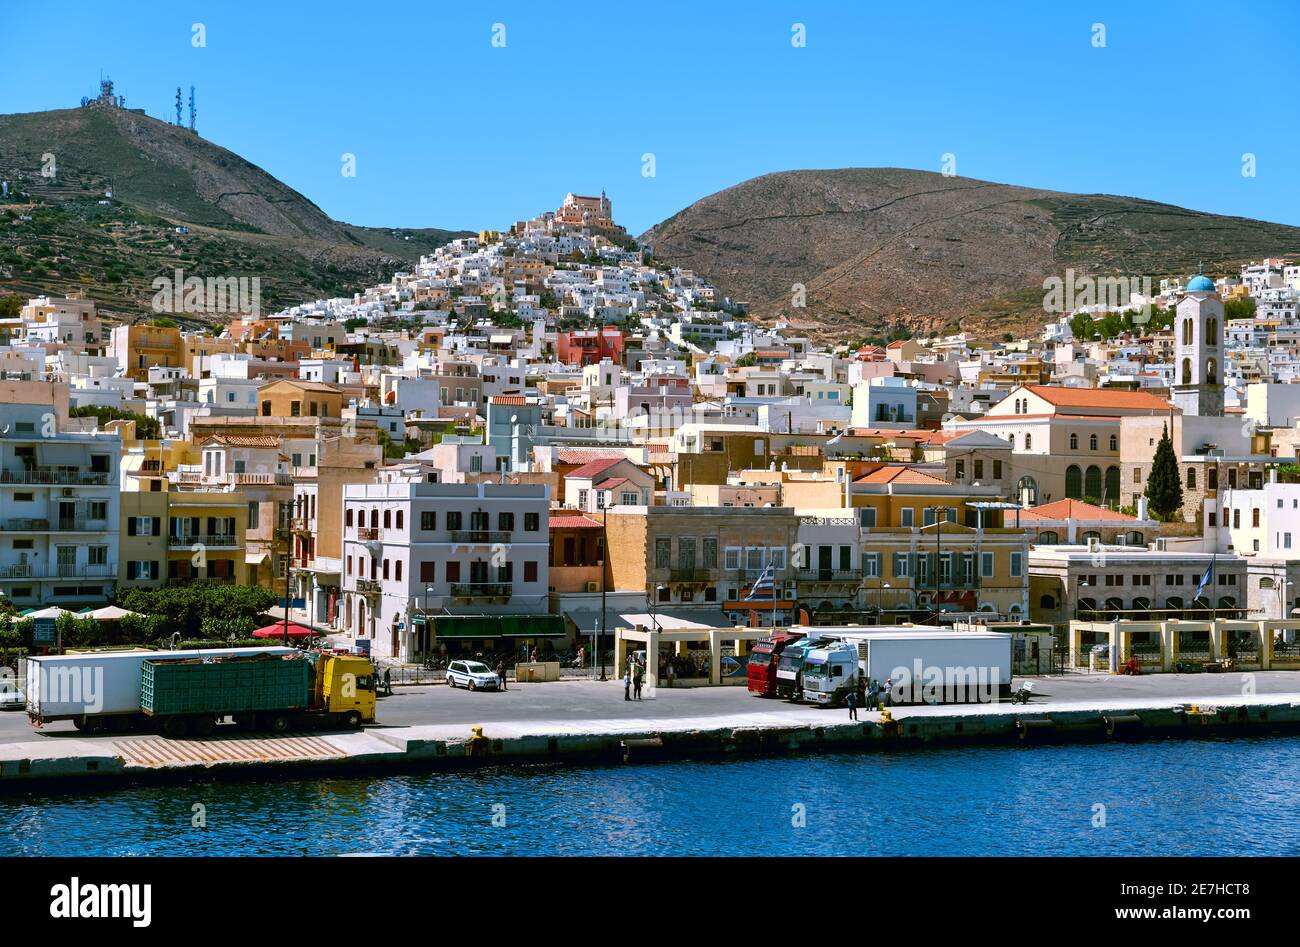 Ano Syros town, Syros island, Greece, St George catholic cathedral above, colorful houses, summer sun, trucks in port of Ermoupoli, Mediterranean sea. Stock Photo